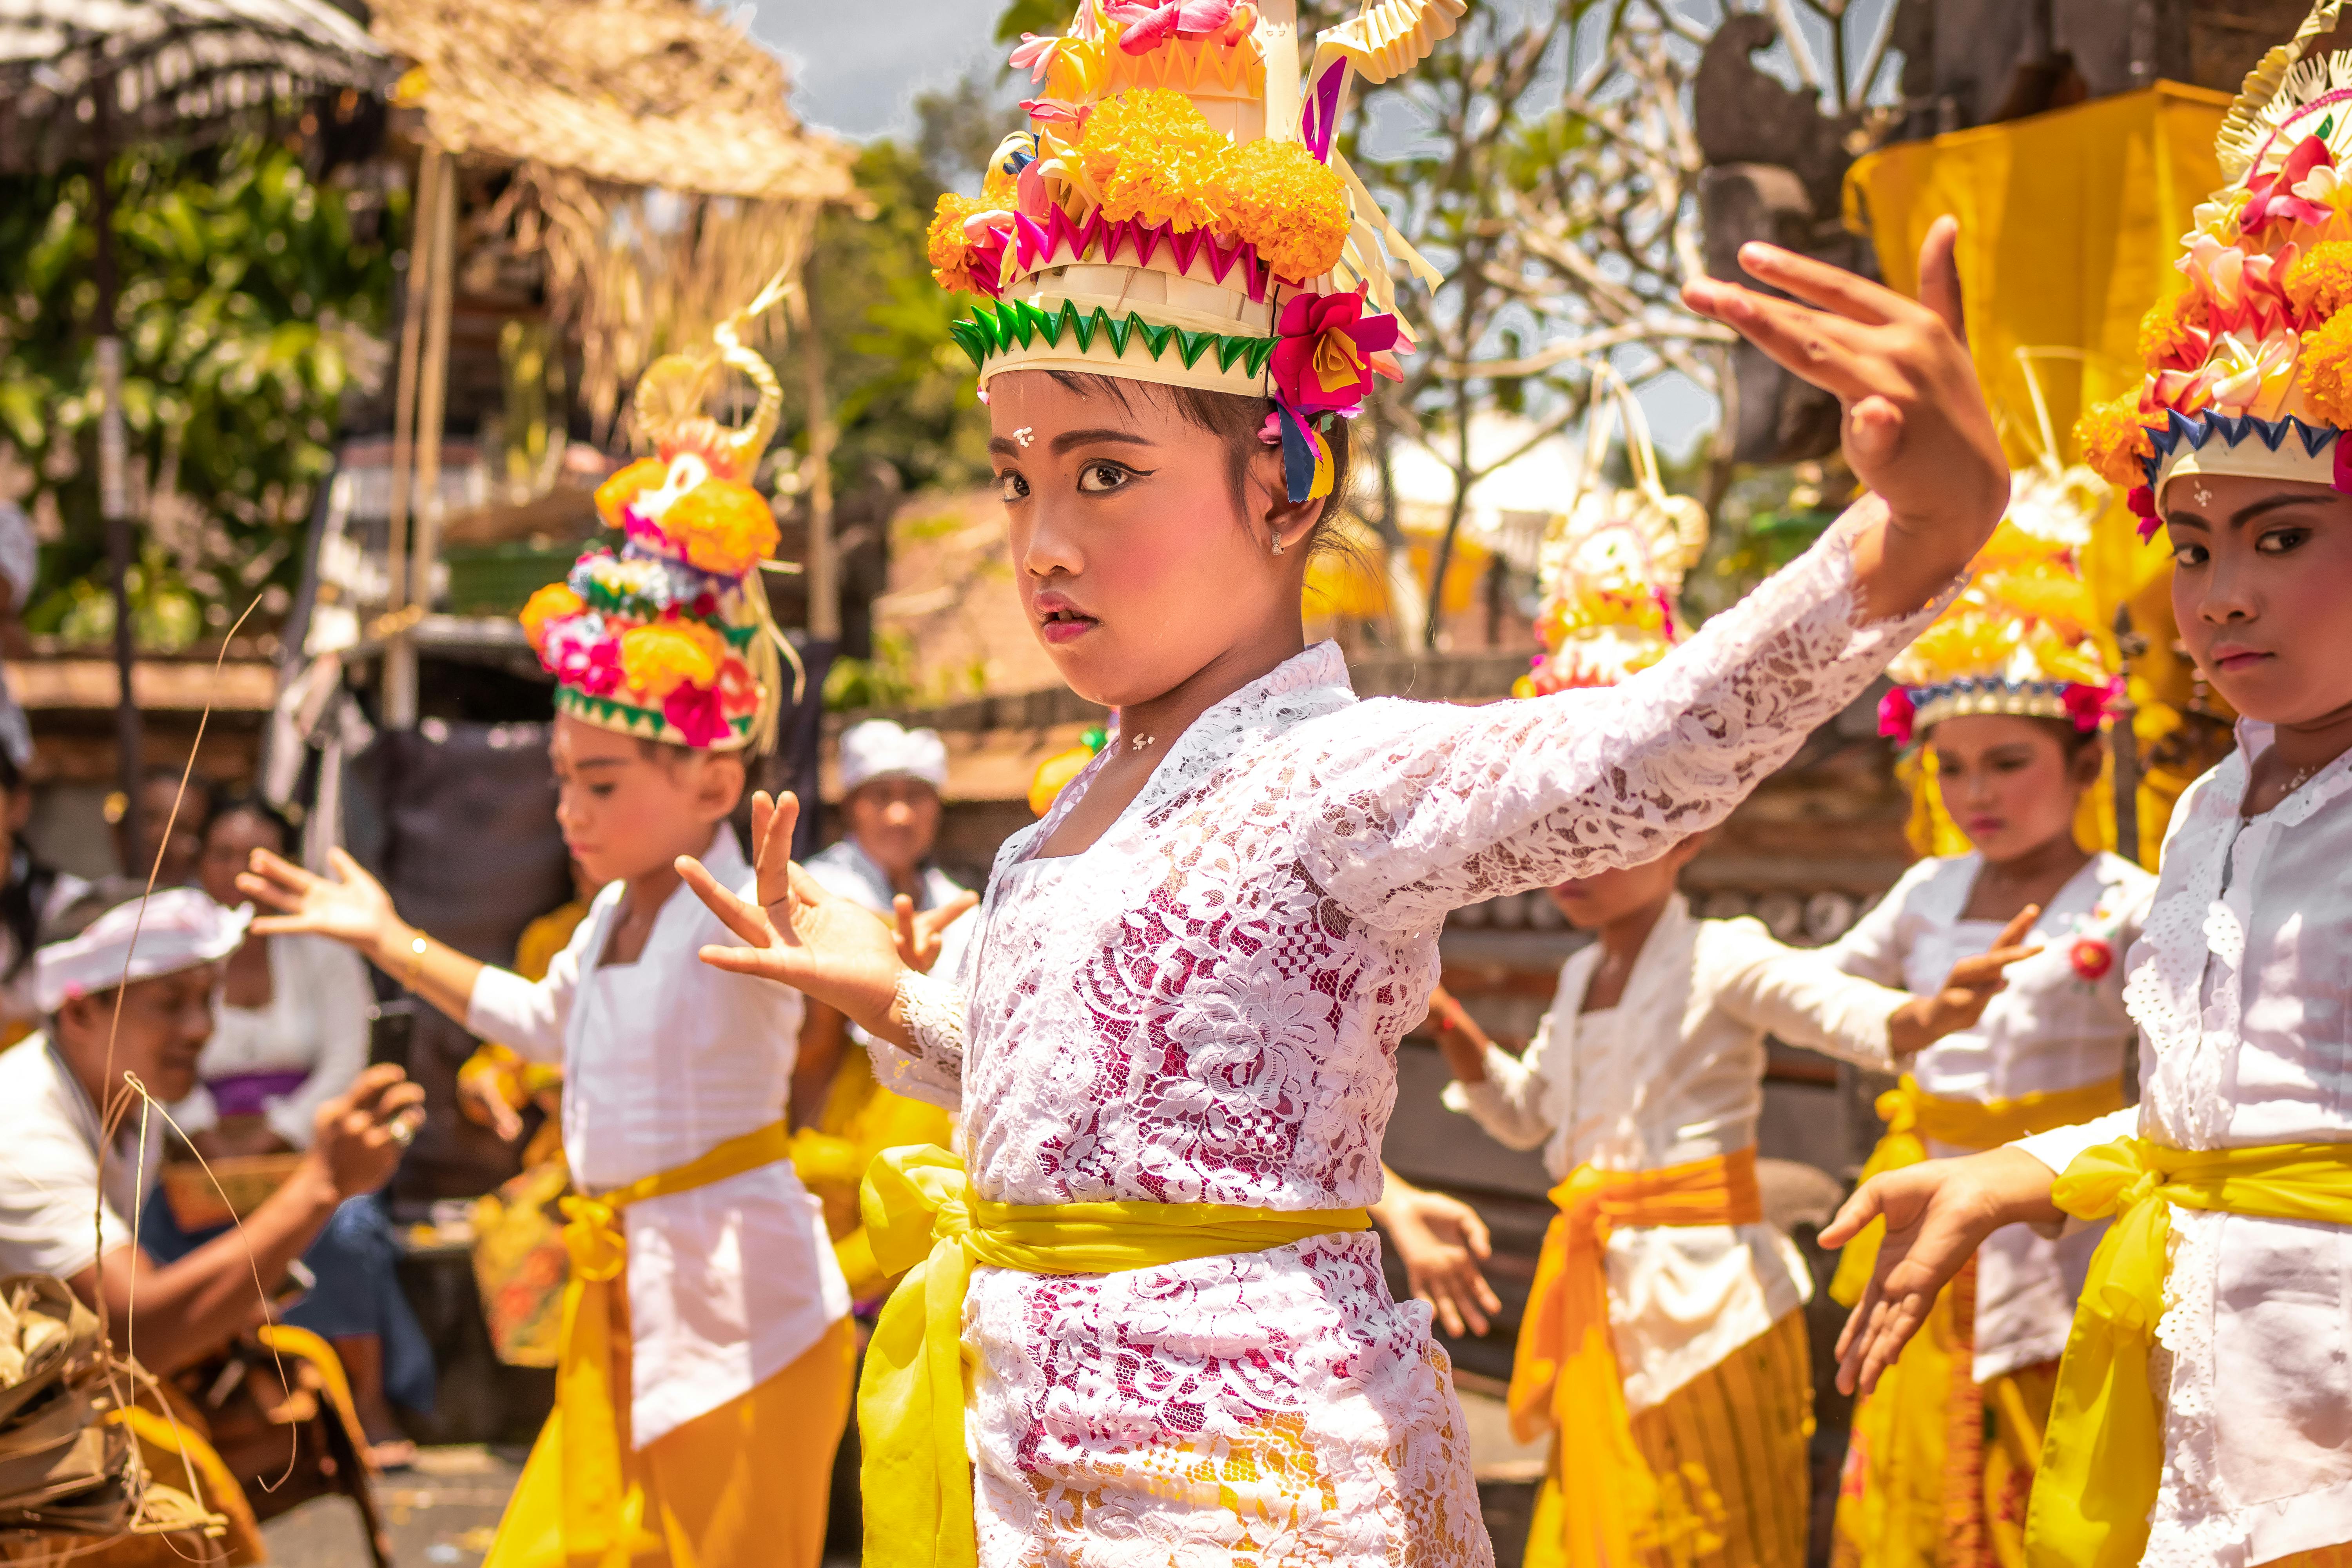 Children Wearing Yellow and White Traditional Costumes and Dancing